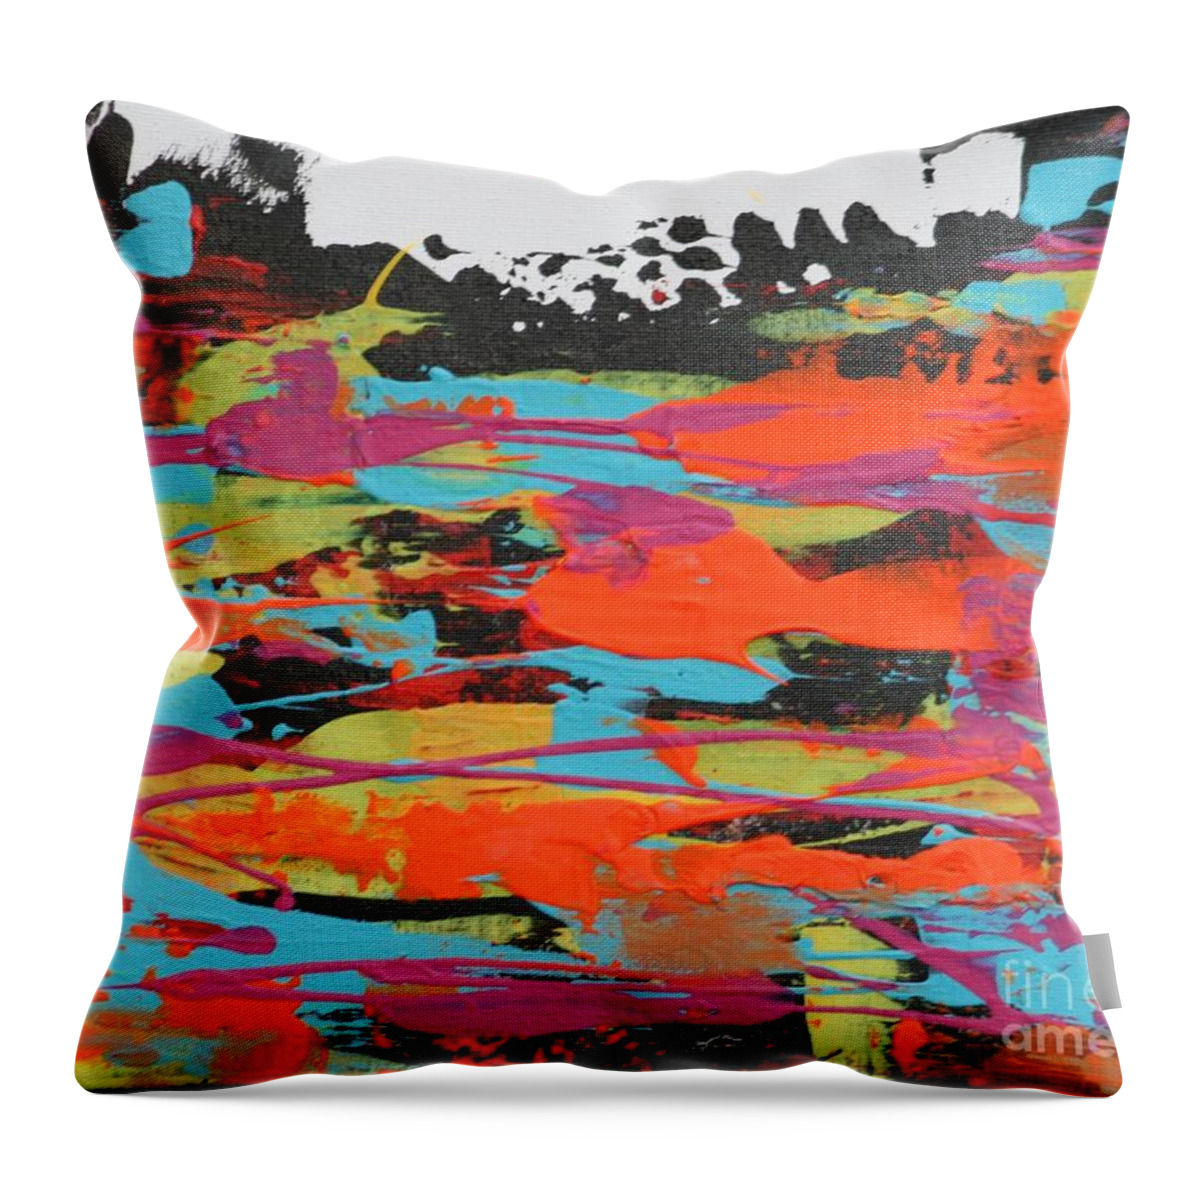 Fiery Colors Throw Pillow featuring the painting River of Fire by Jean Clarke